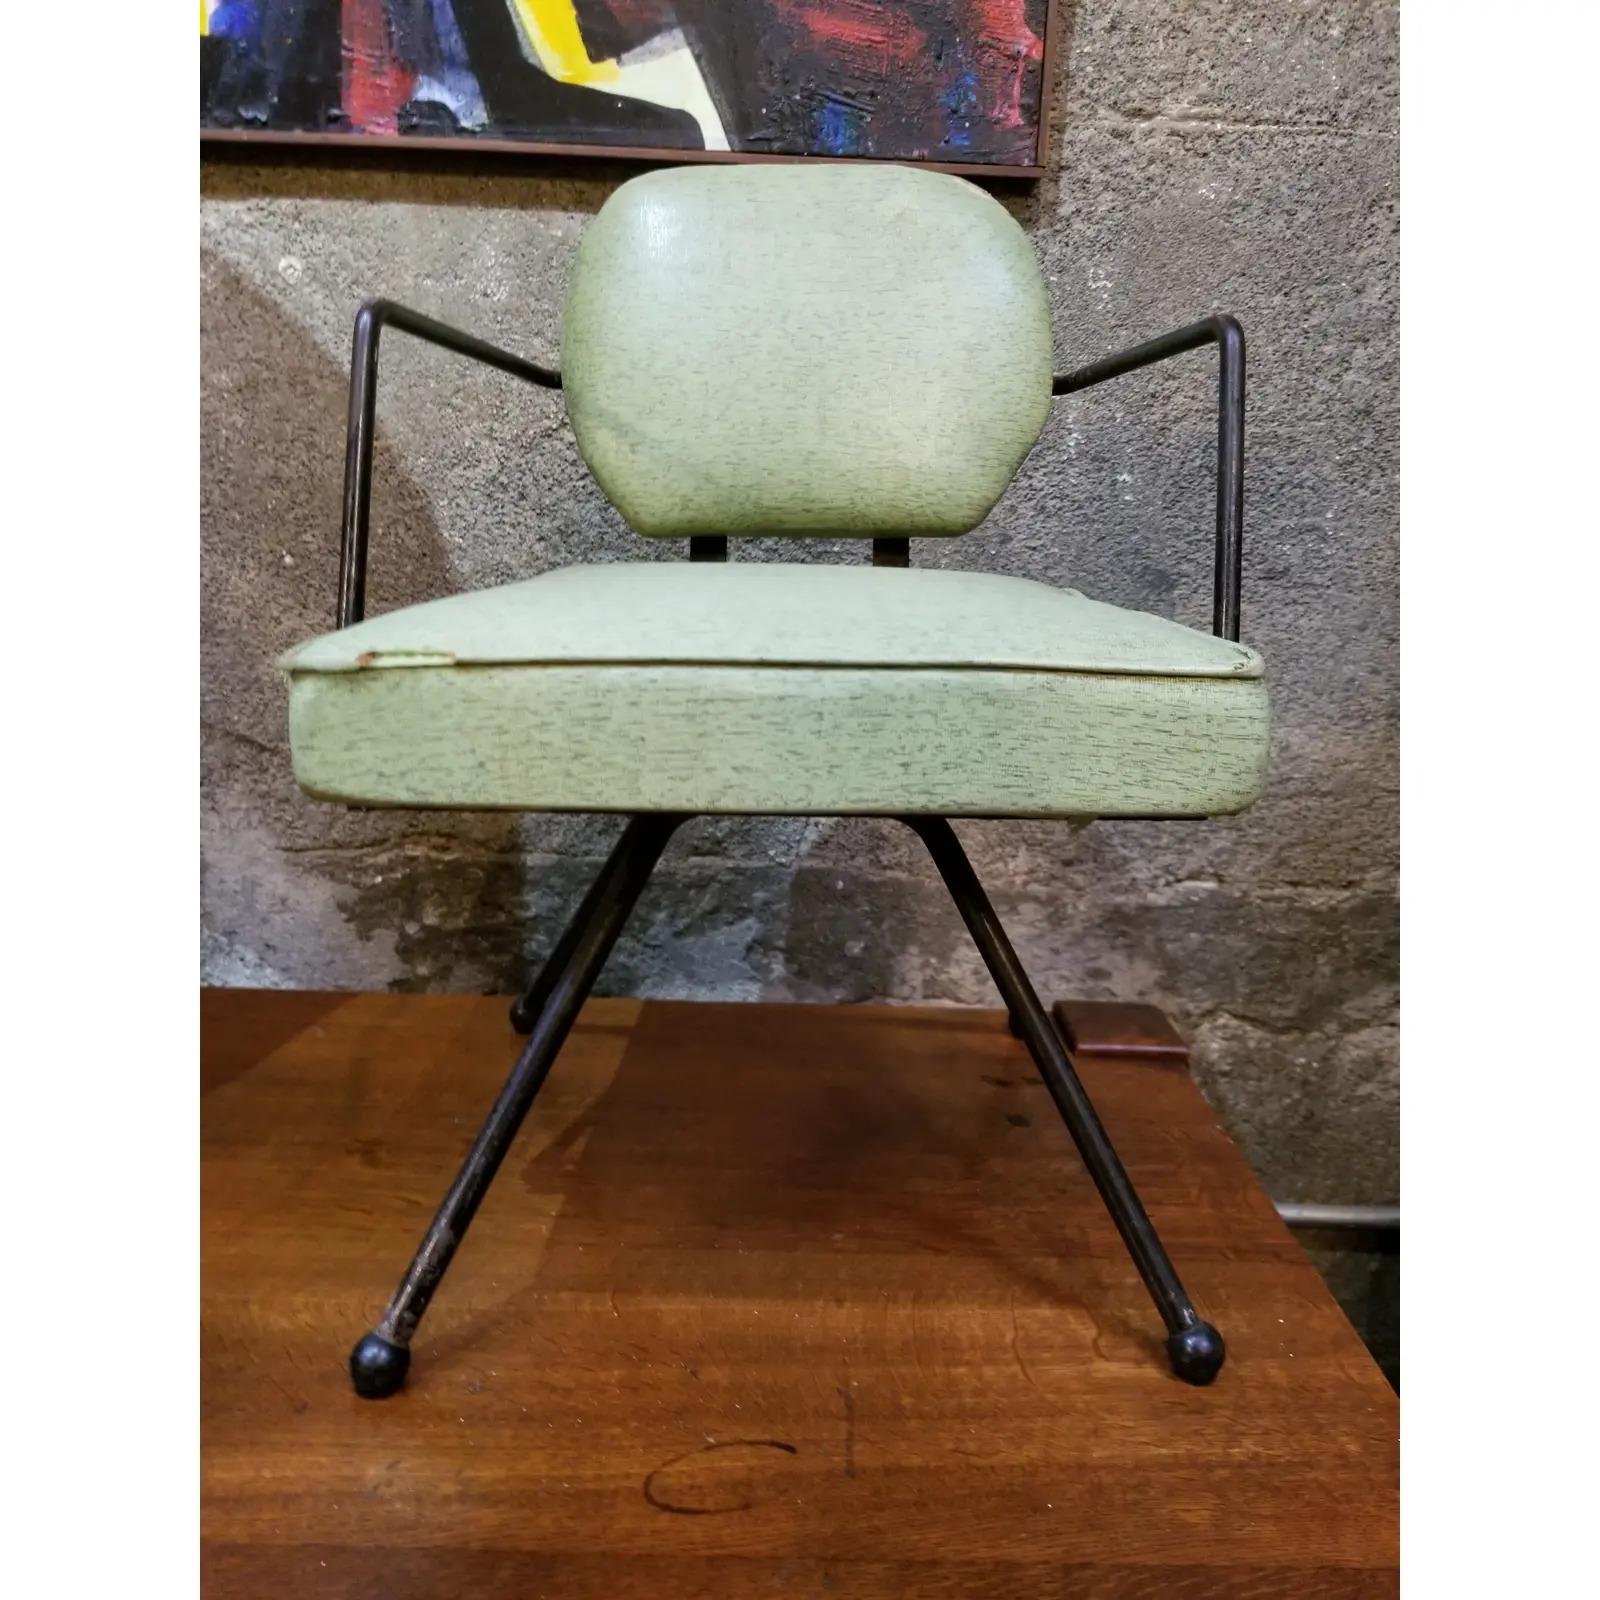 Charming child's swivel lounge chair made of iron and vinyl, circa 1950s.